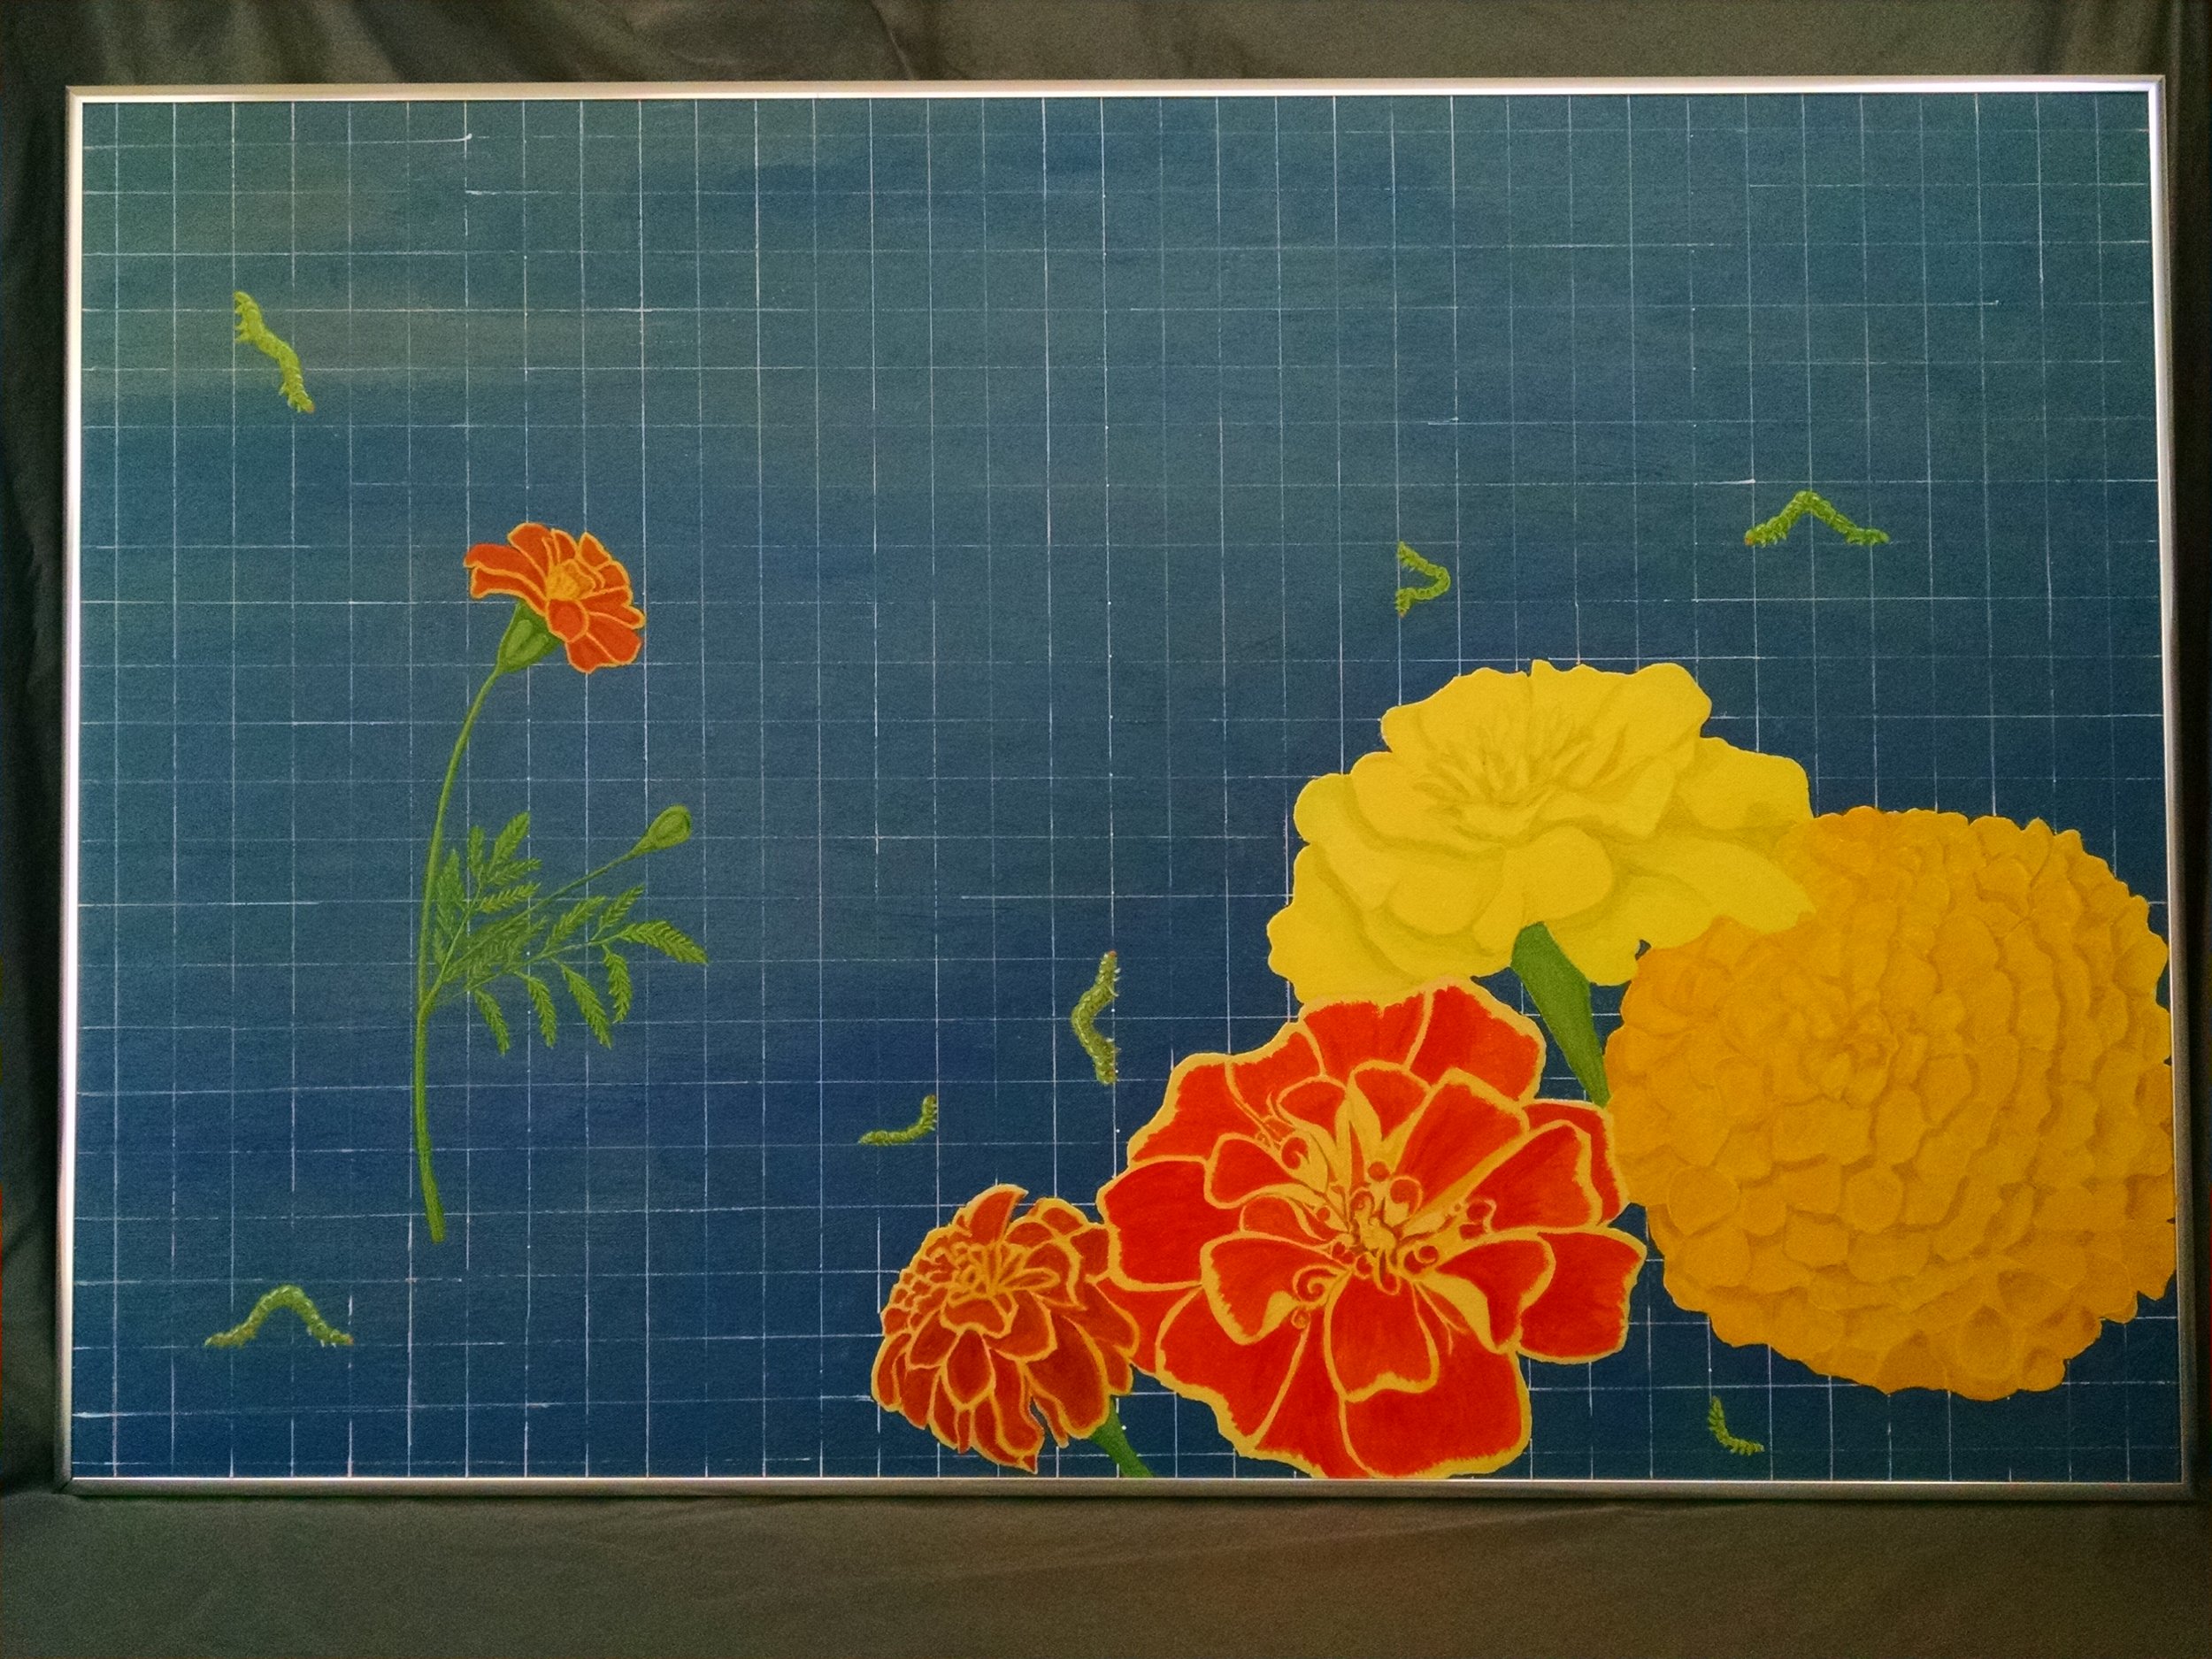 Measuring the Marigolds